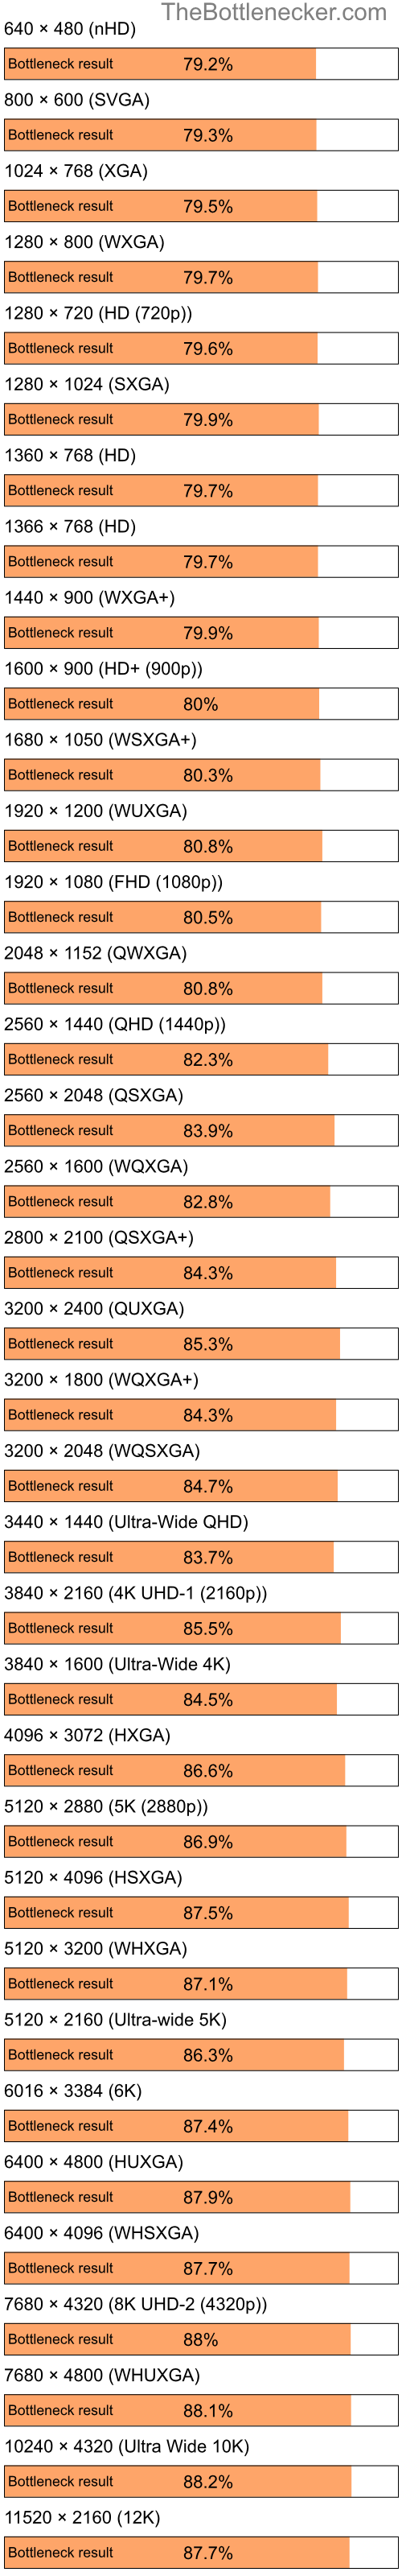 Bottleneck results by resolution for Intel Pentium 4 and NVIDIA nForce 620i in Graphic Card Intense Tasks